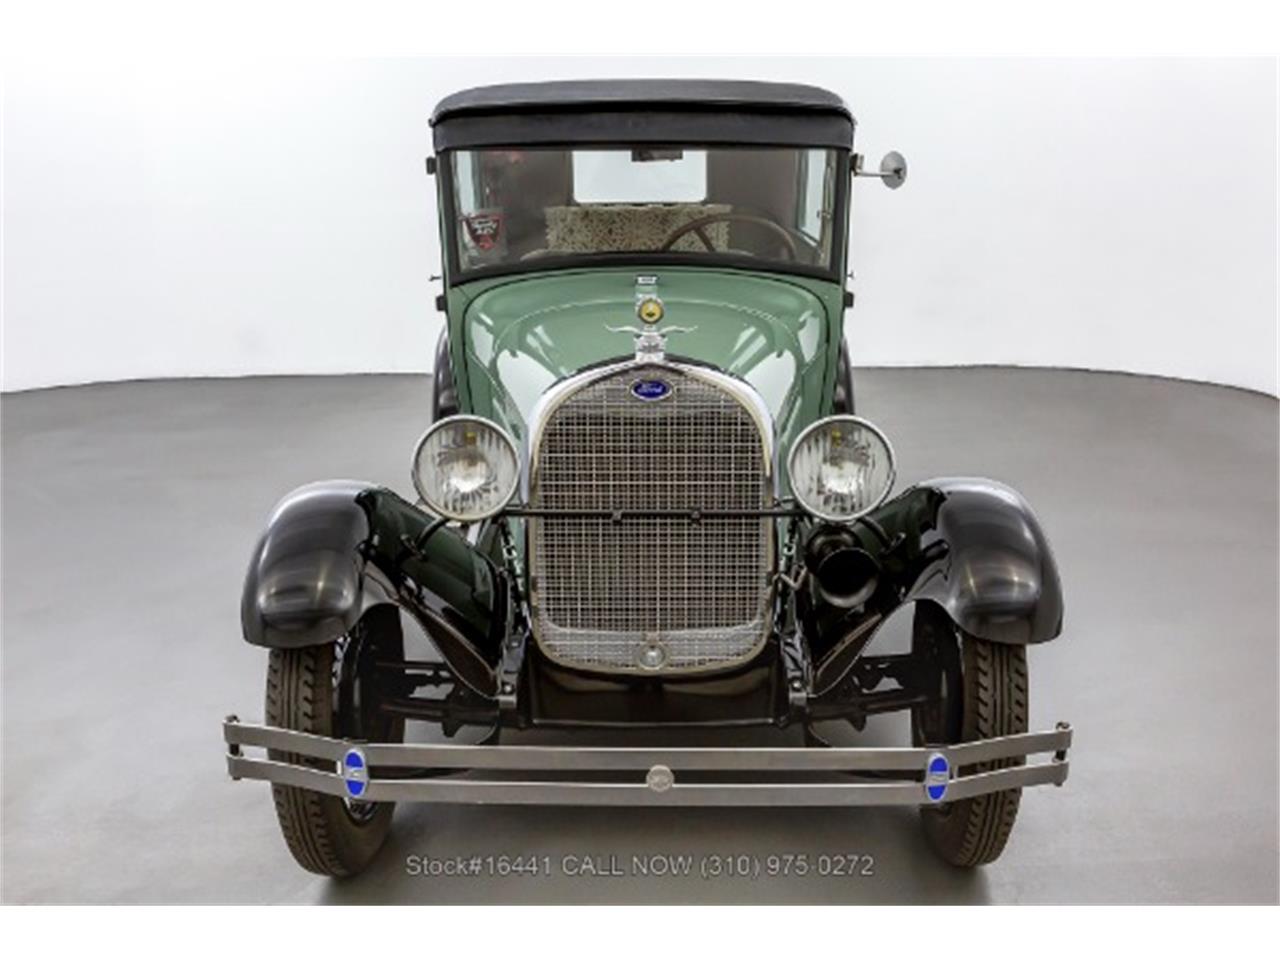 For Sale: 1929 Ford Model A in Beverly Hills, California for sale in Beverly Hills, CA